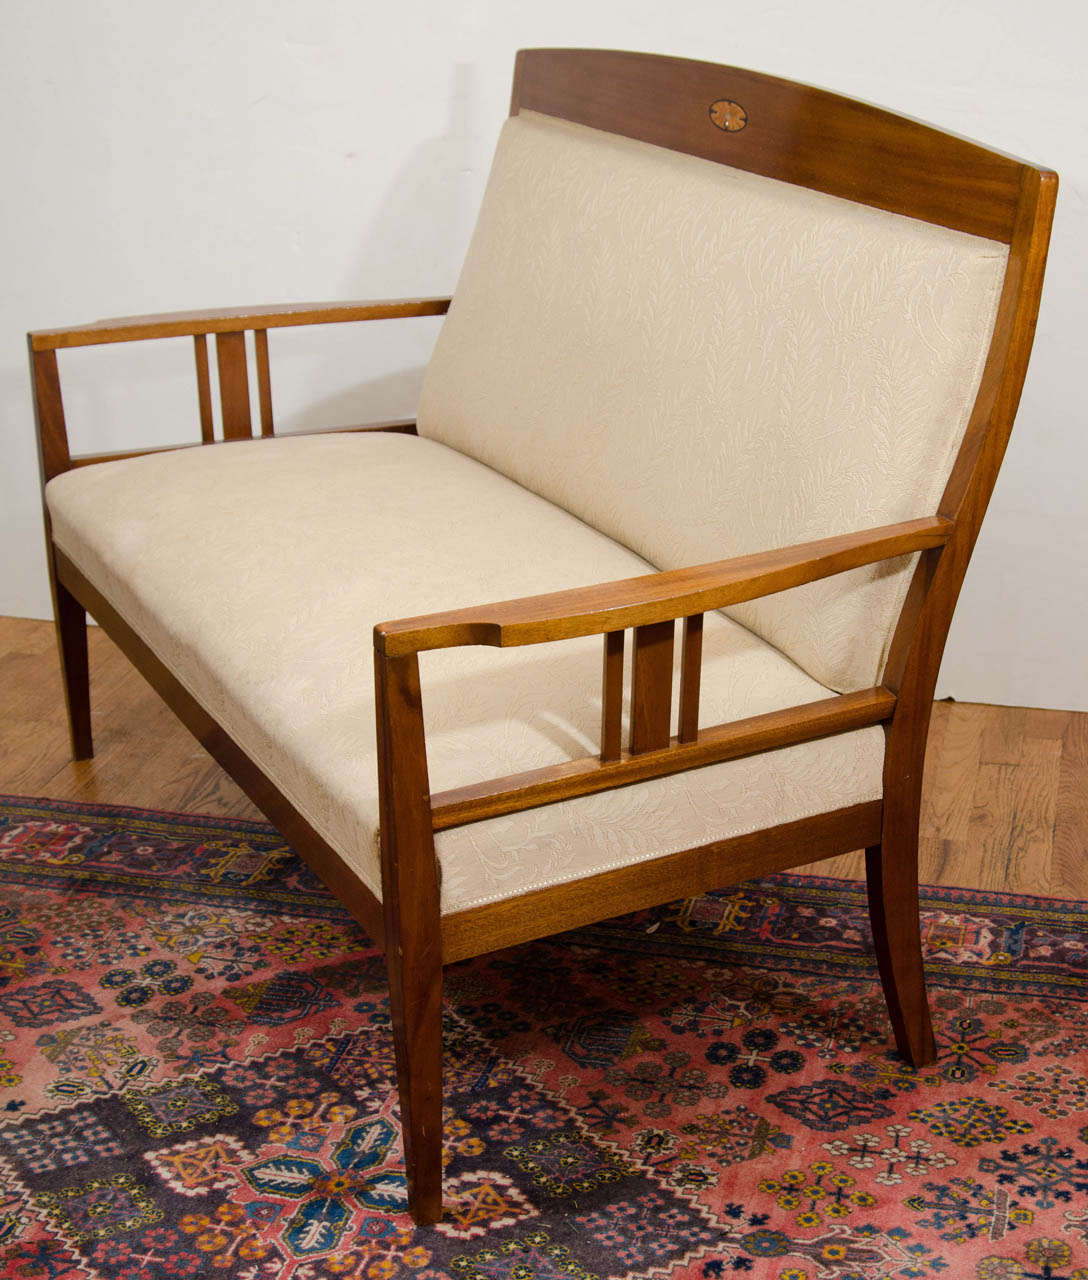 20th Century Jugendstil Settee with Ebony, Birch and Mother-of-Pearl Inlay For Sale